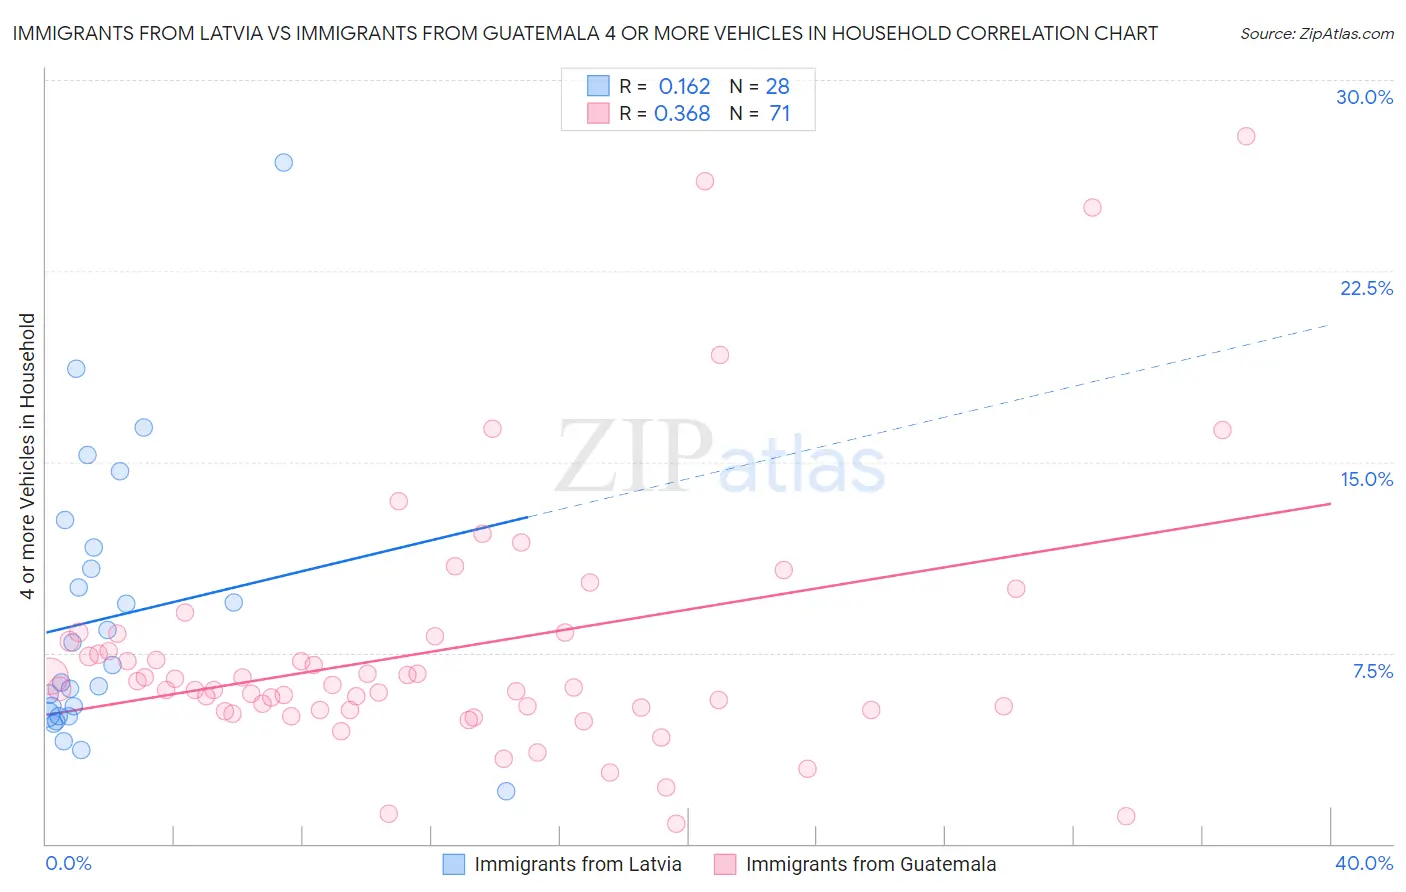 Immigrants from Latvia vs Immigrants from Guatemala 4 or more Vehicles in Household